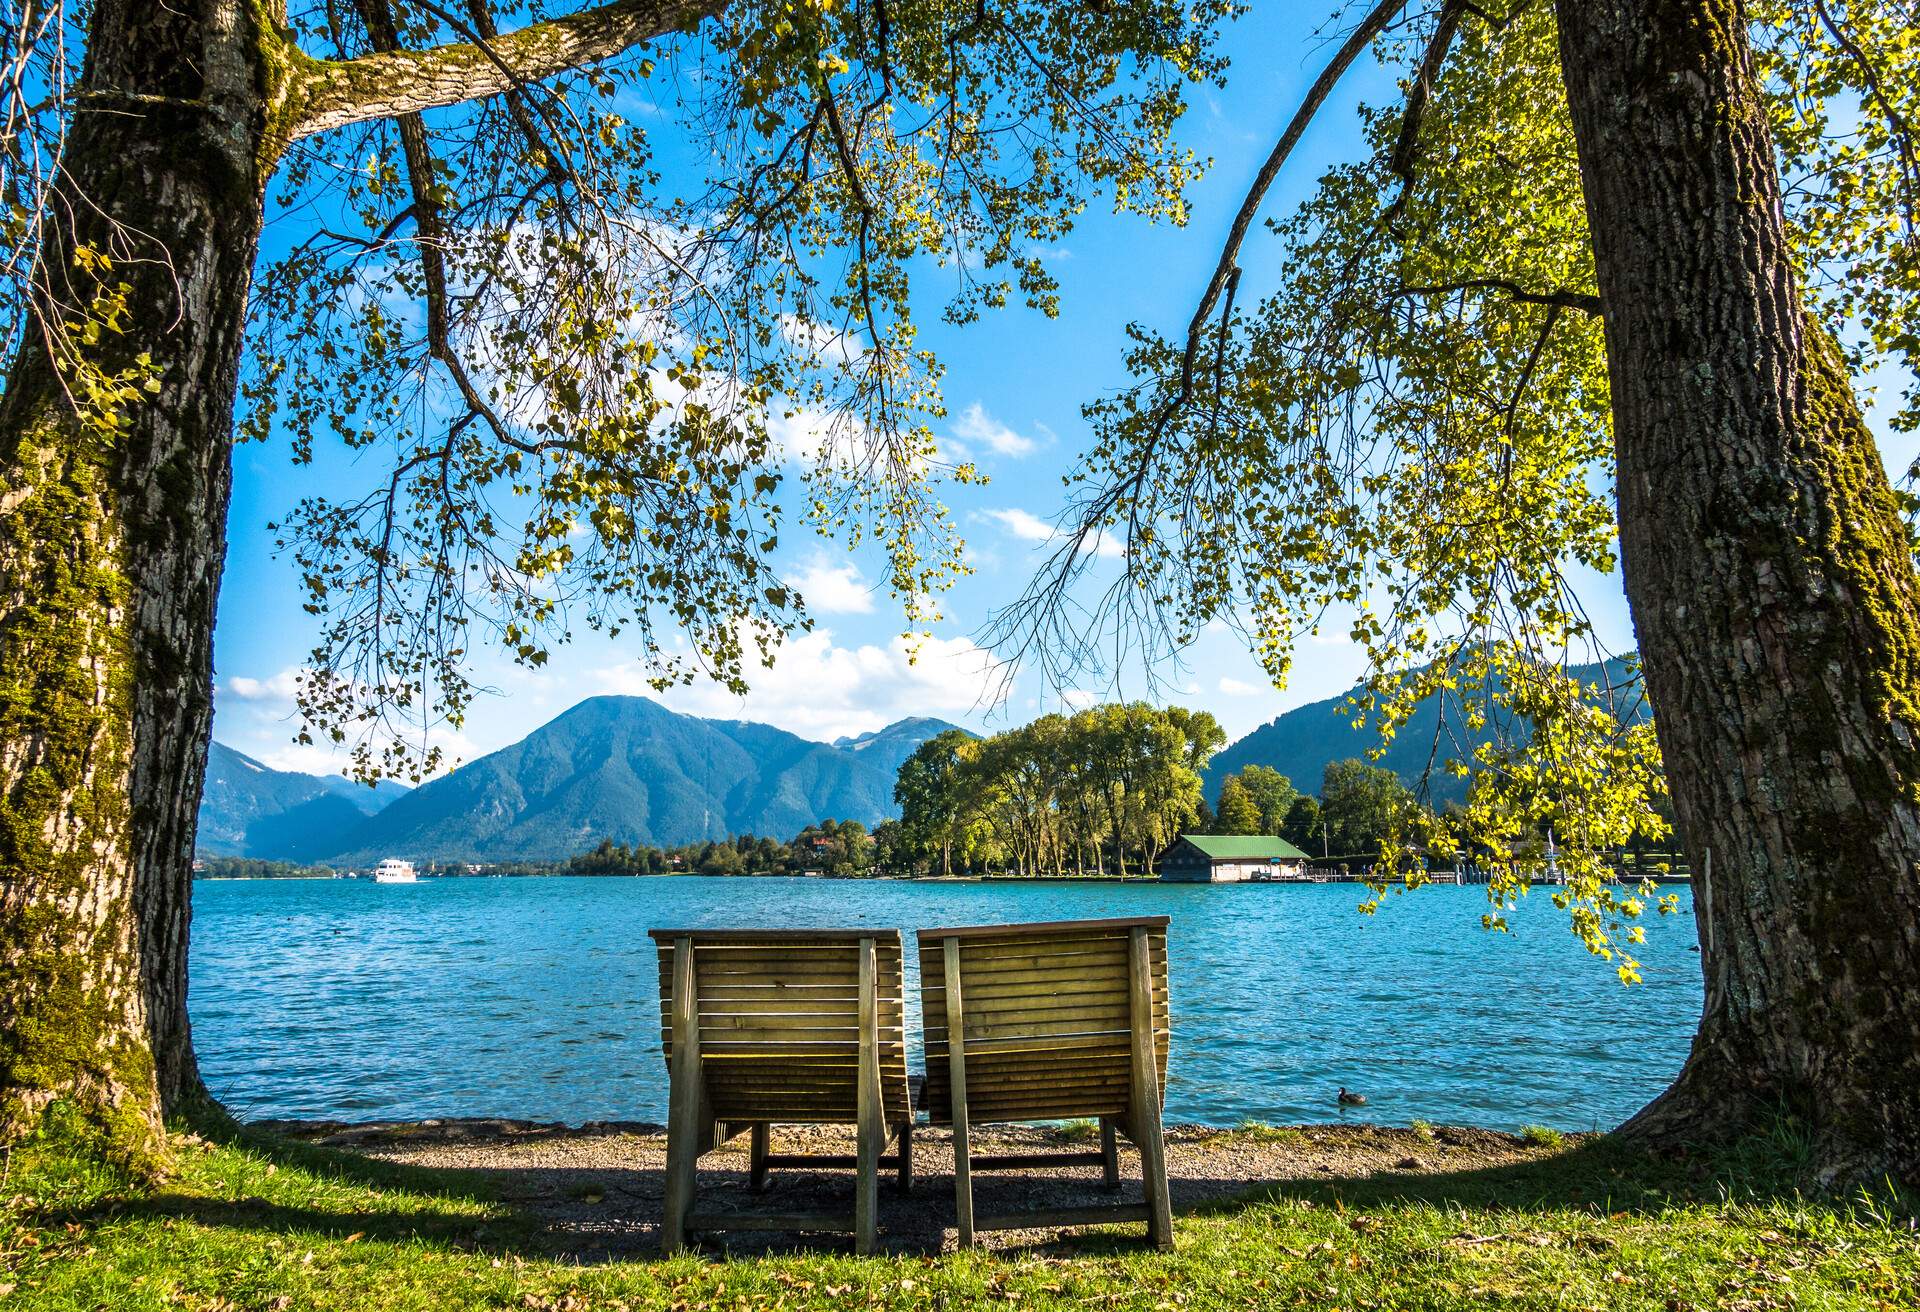 famous tegernsee lake in bavaria - germany
